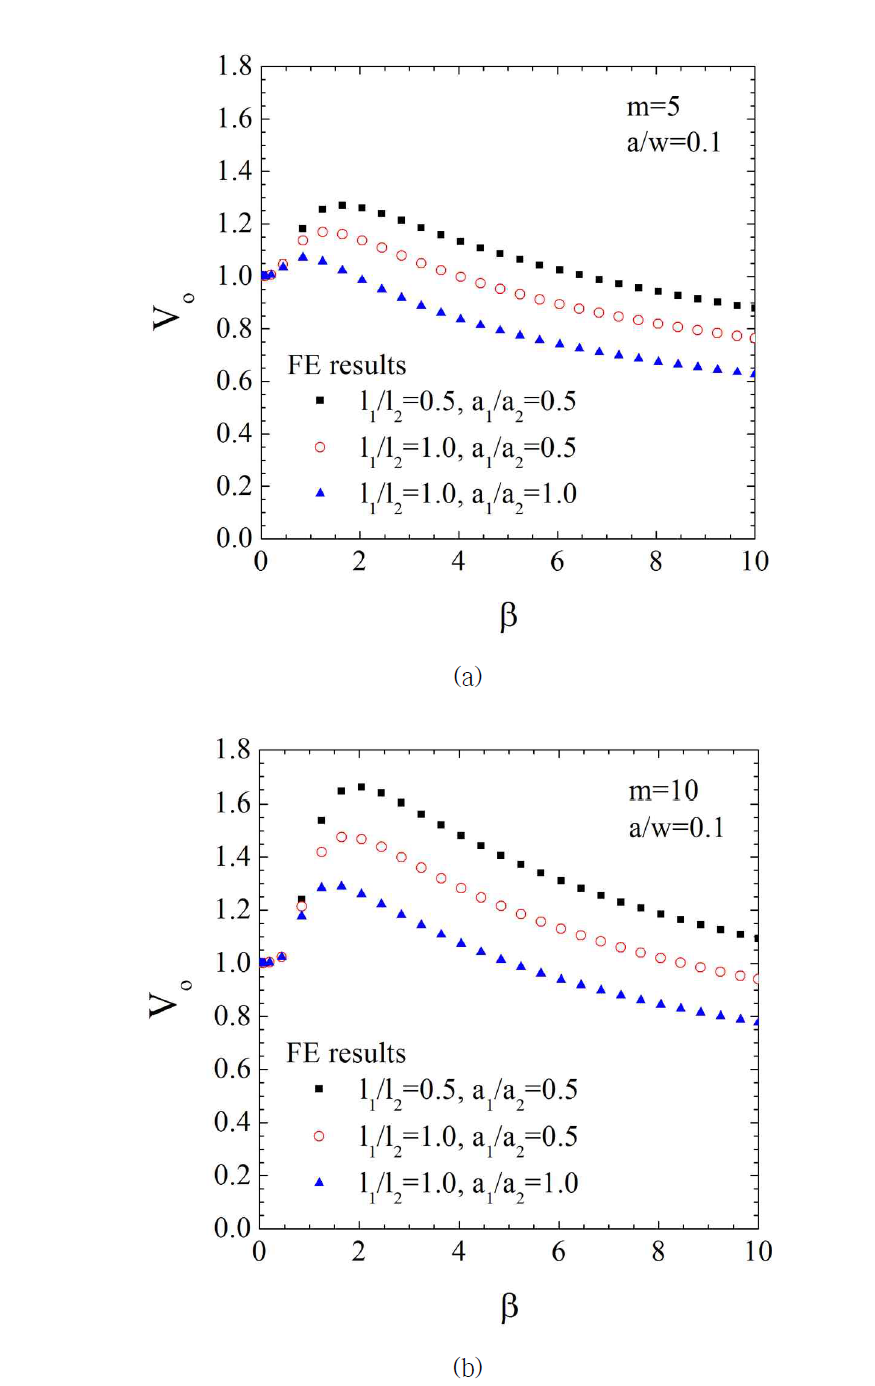 Variations of Vo obtained from FE results for a/w=0.1 ; for two value of (a) m=5 and (b) m=10